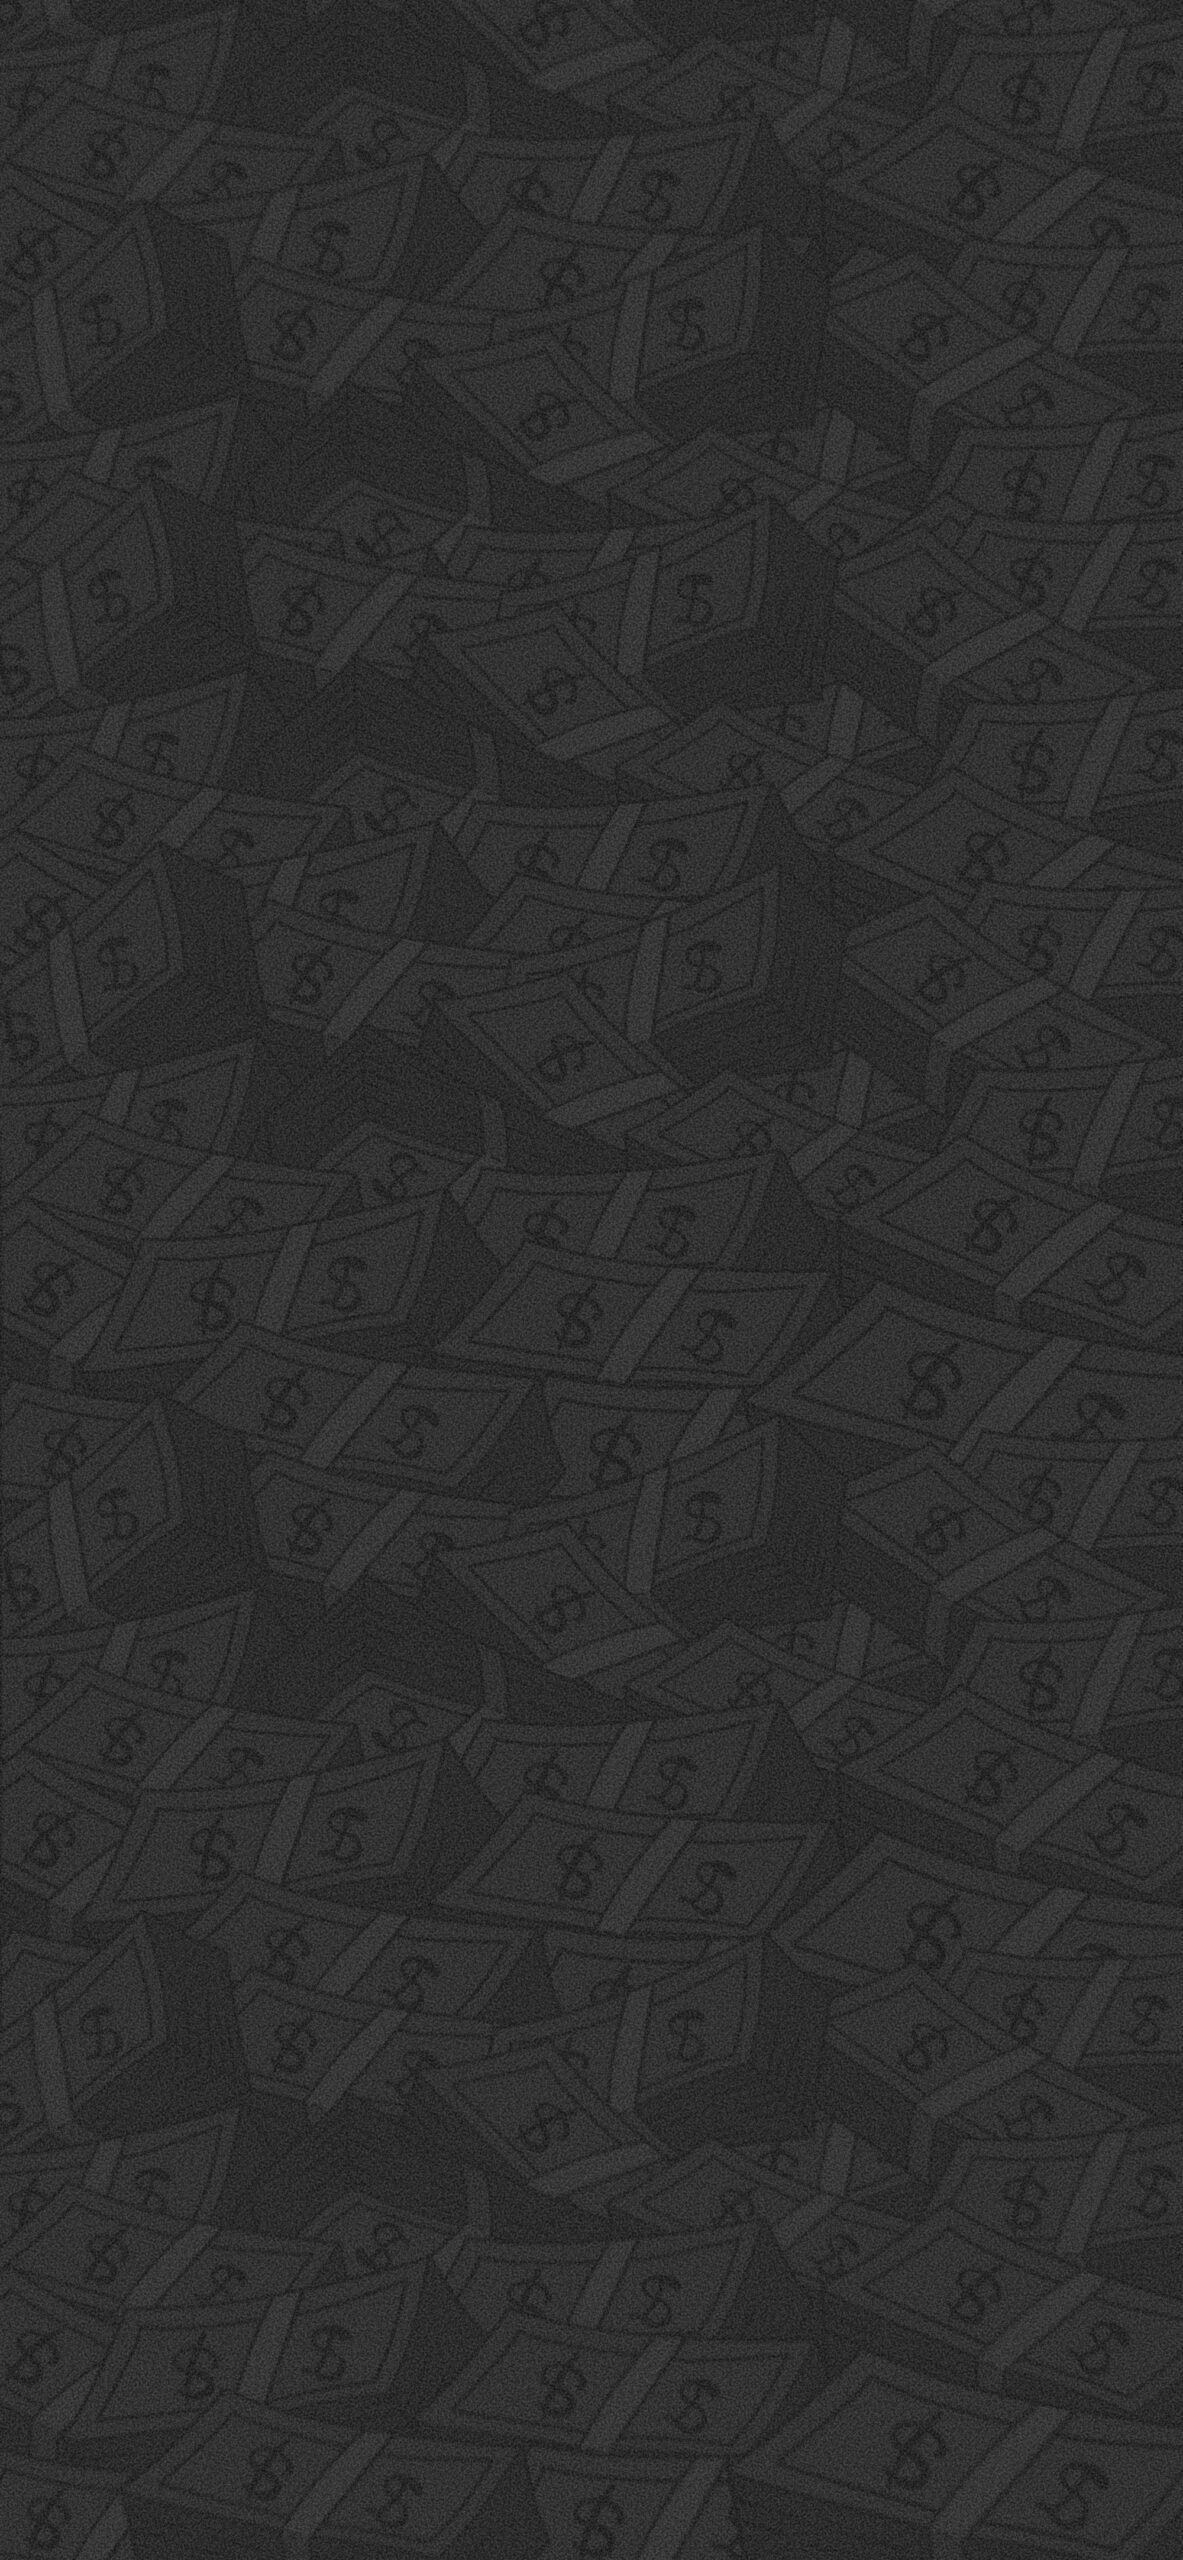 IPhone wallpaper with a money pattern - Looney Tunes